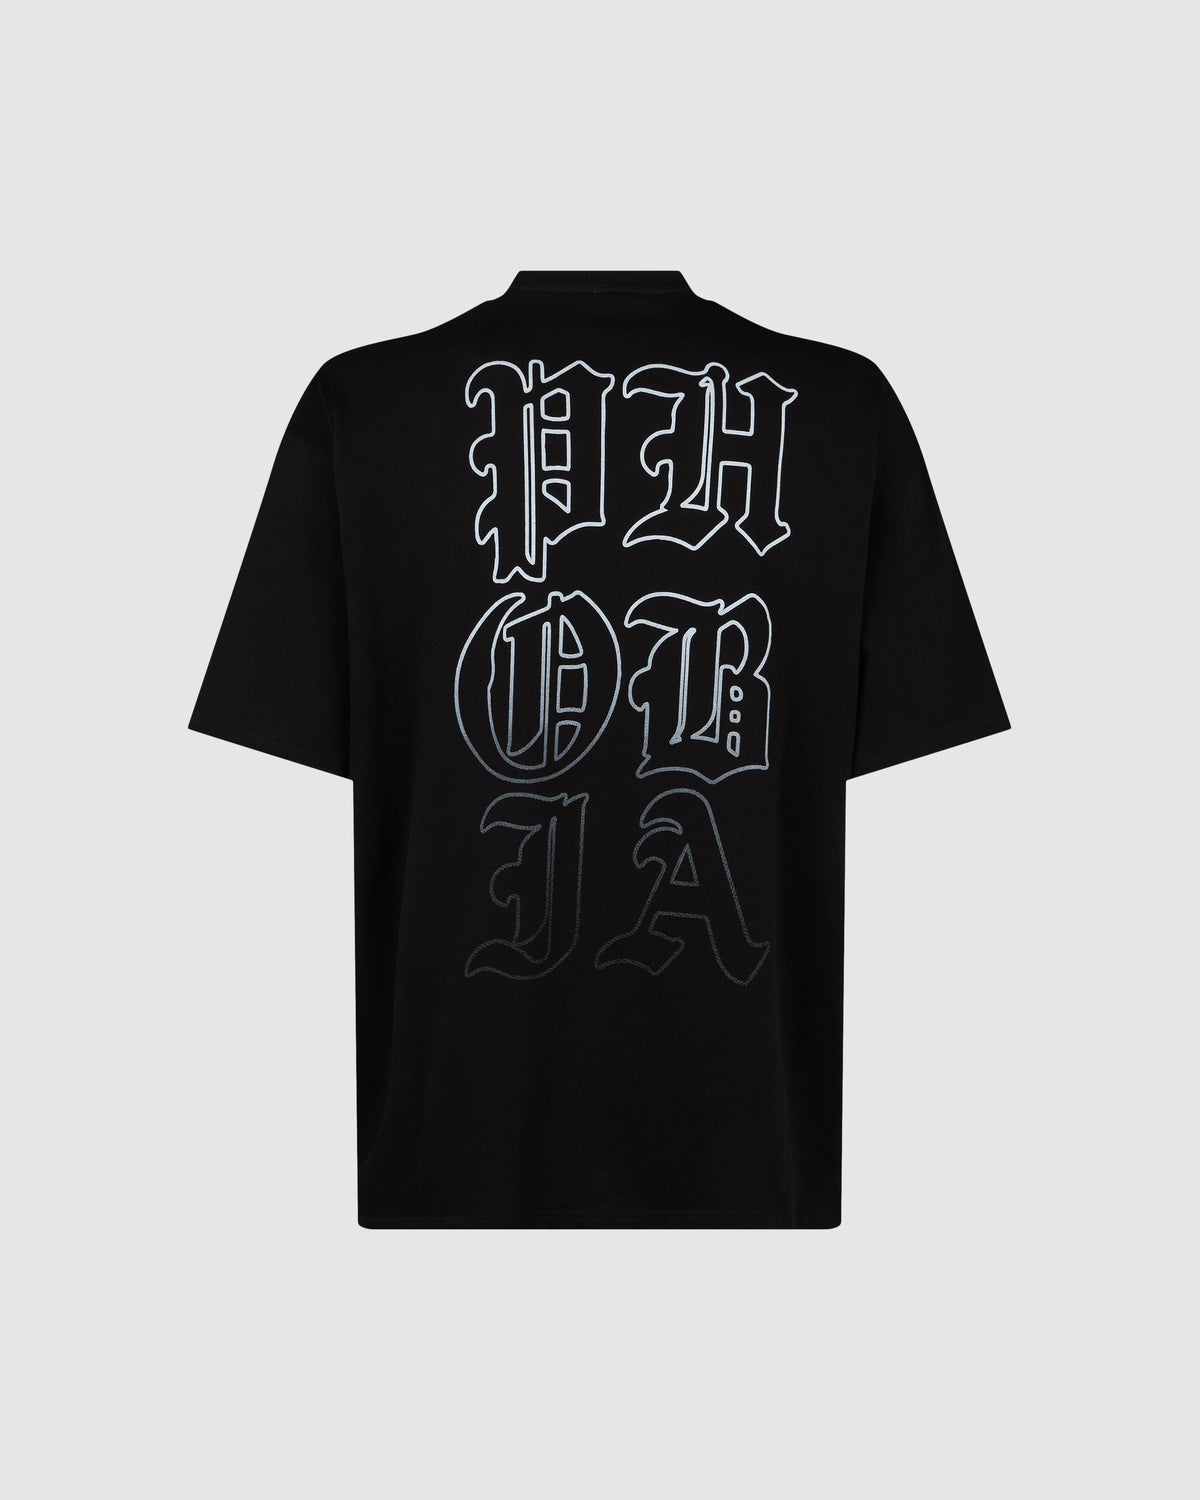 PHOBIA BLACK T-SHIRT WITH WHITE MOUTH PRINT